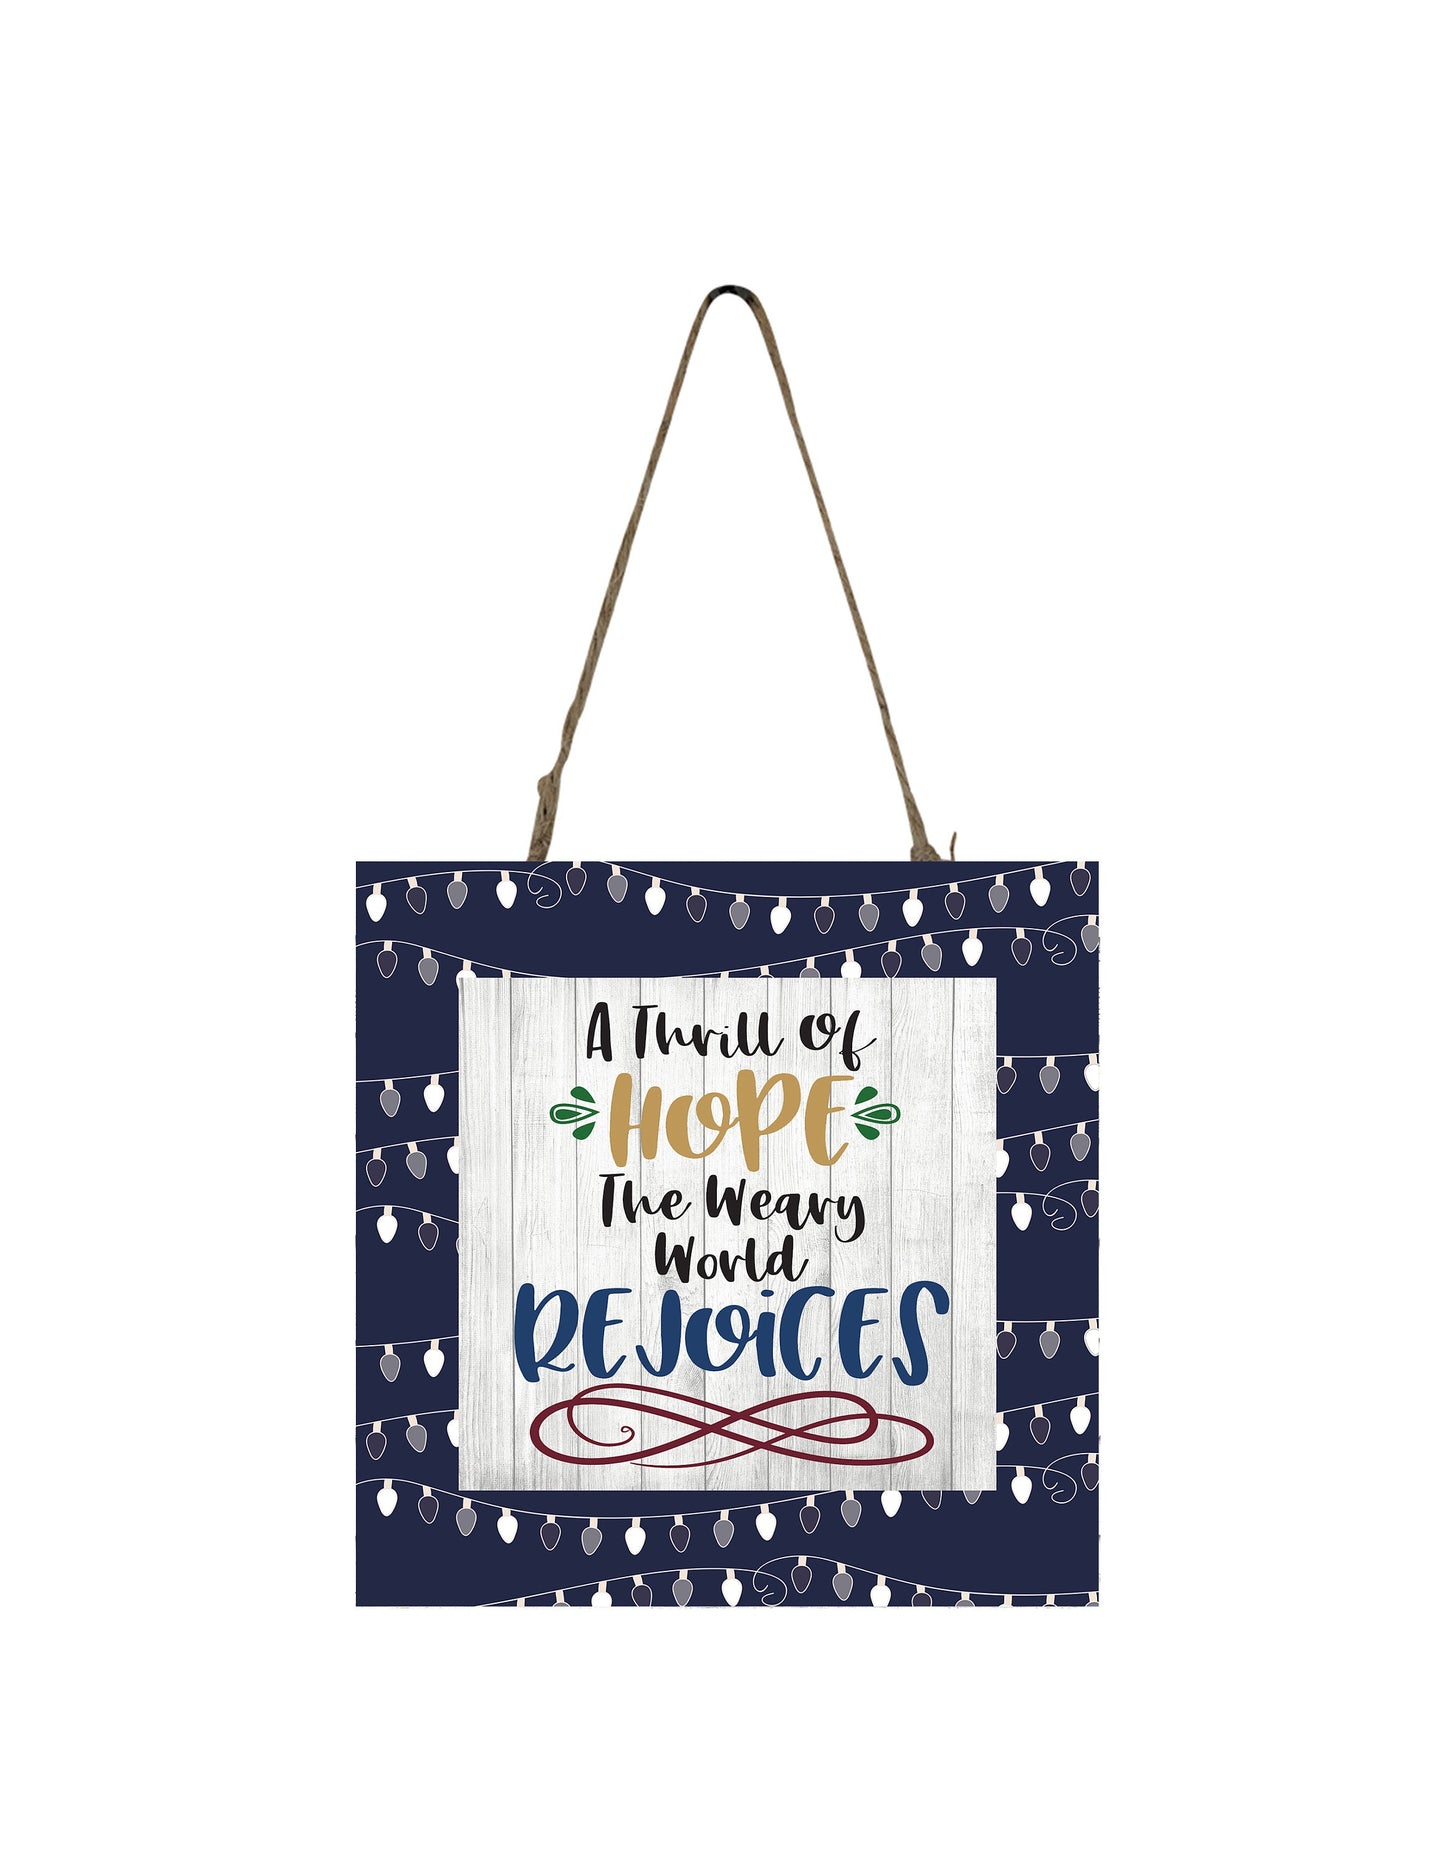 A Thrill of Hope The Weary World Rejoices Printed Handmade Wood Christmas Ornament Small Sign